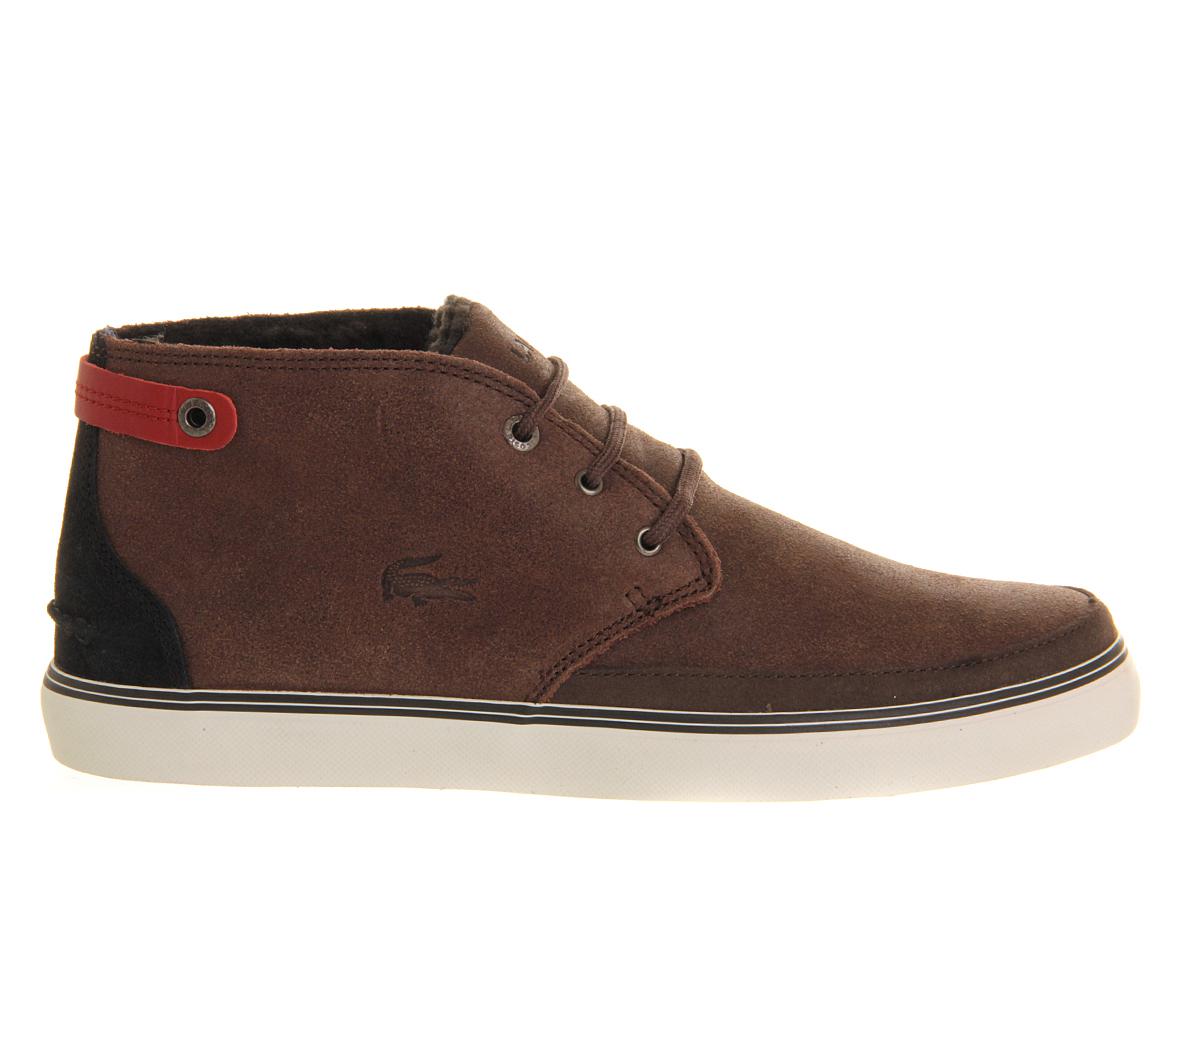 Lacoste Clavel in Brown for Men - Lyst